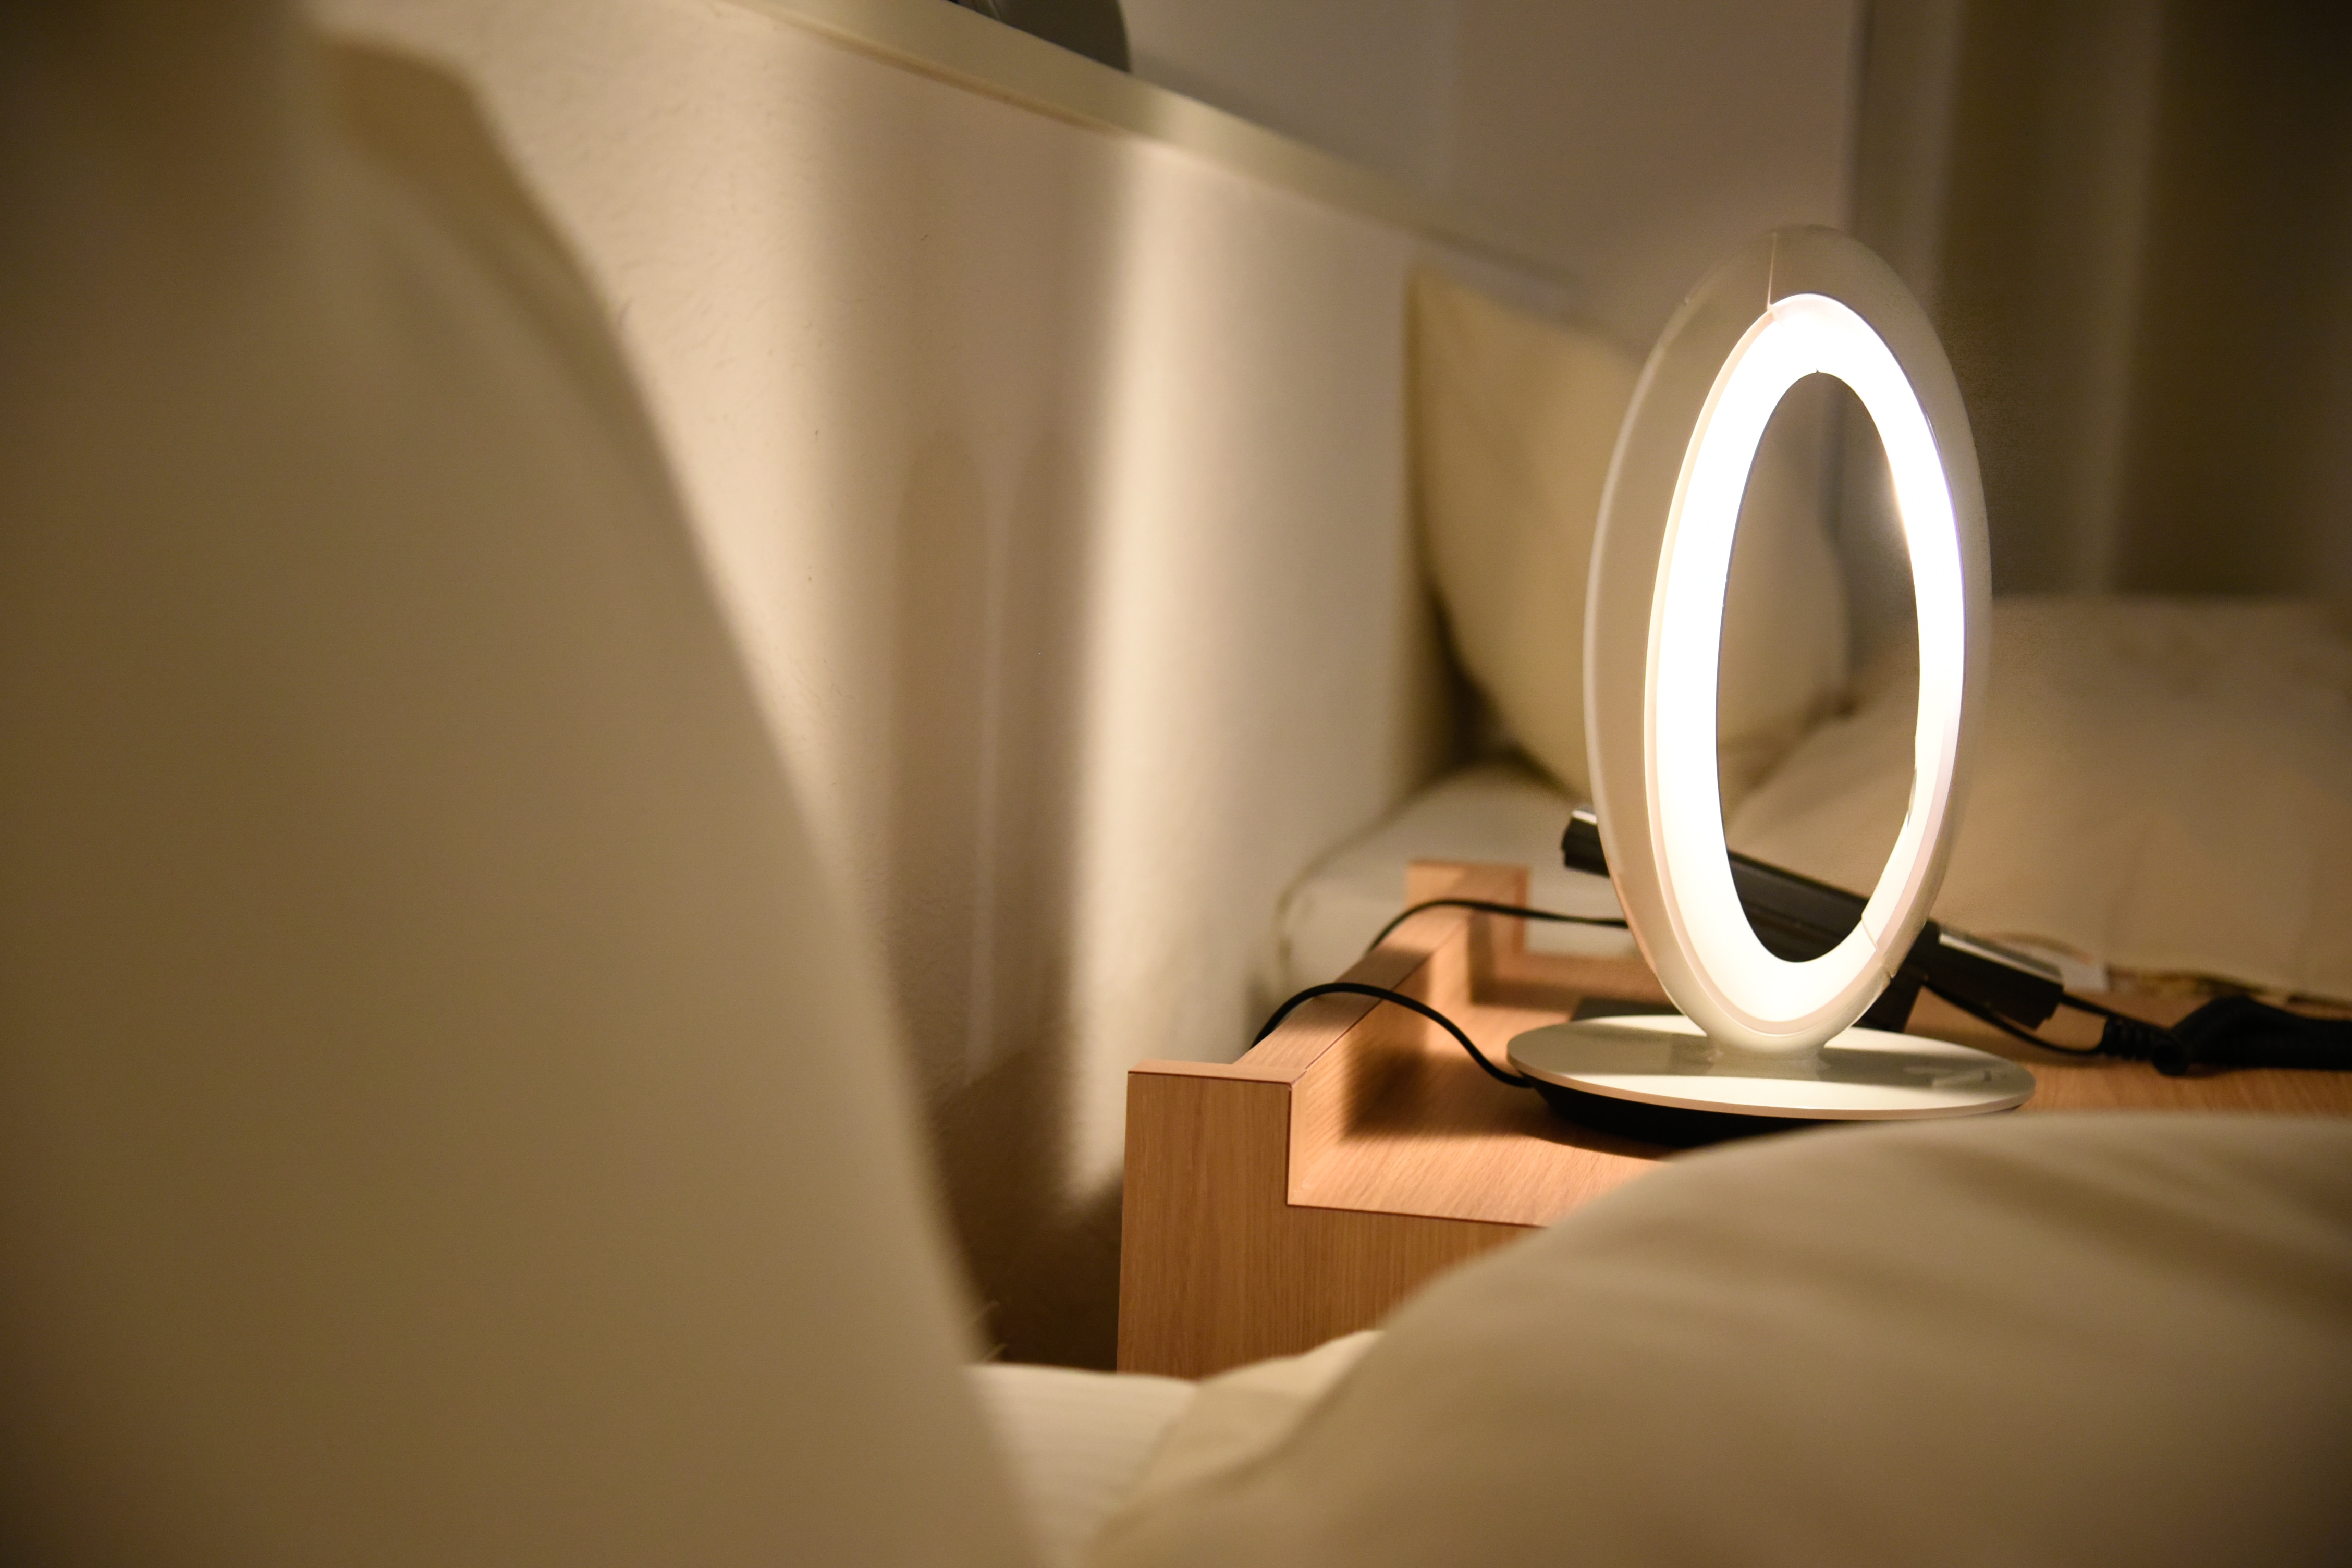 Relax with the light accents at the bedside